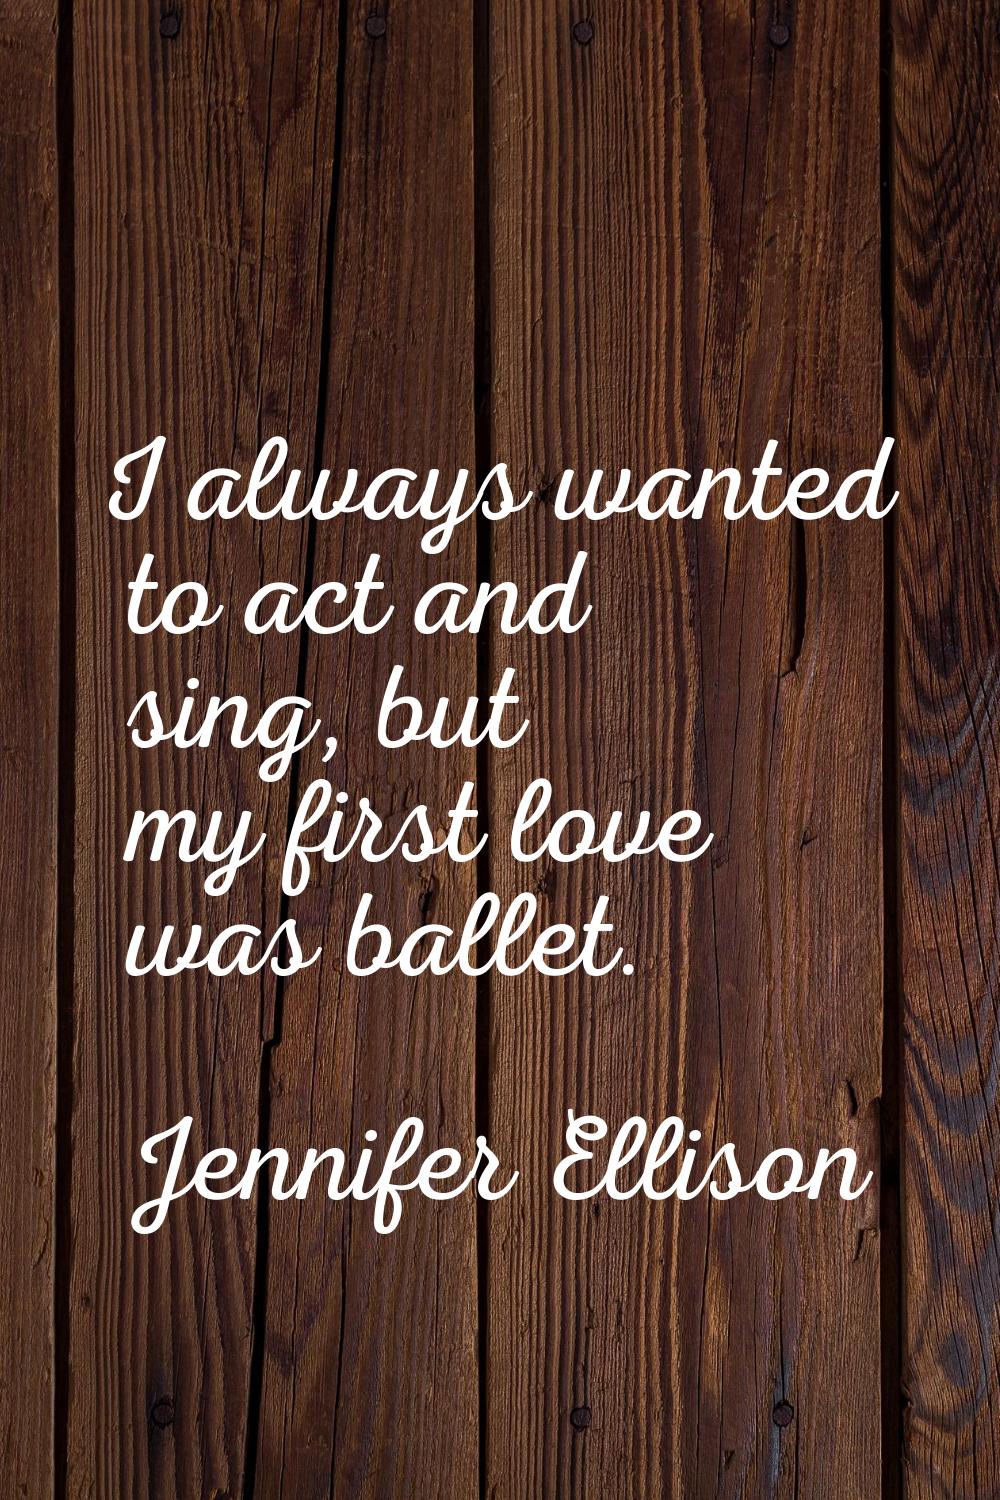 I always wanted to act and sing, but my first love was ballet.